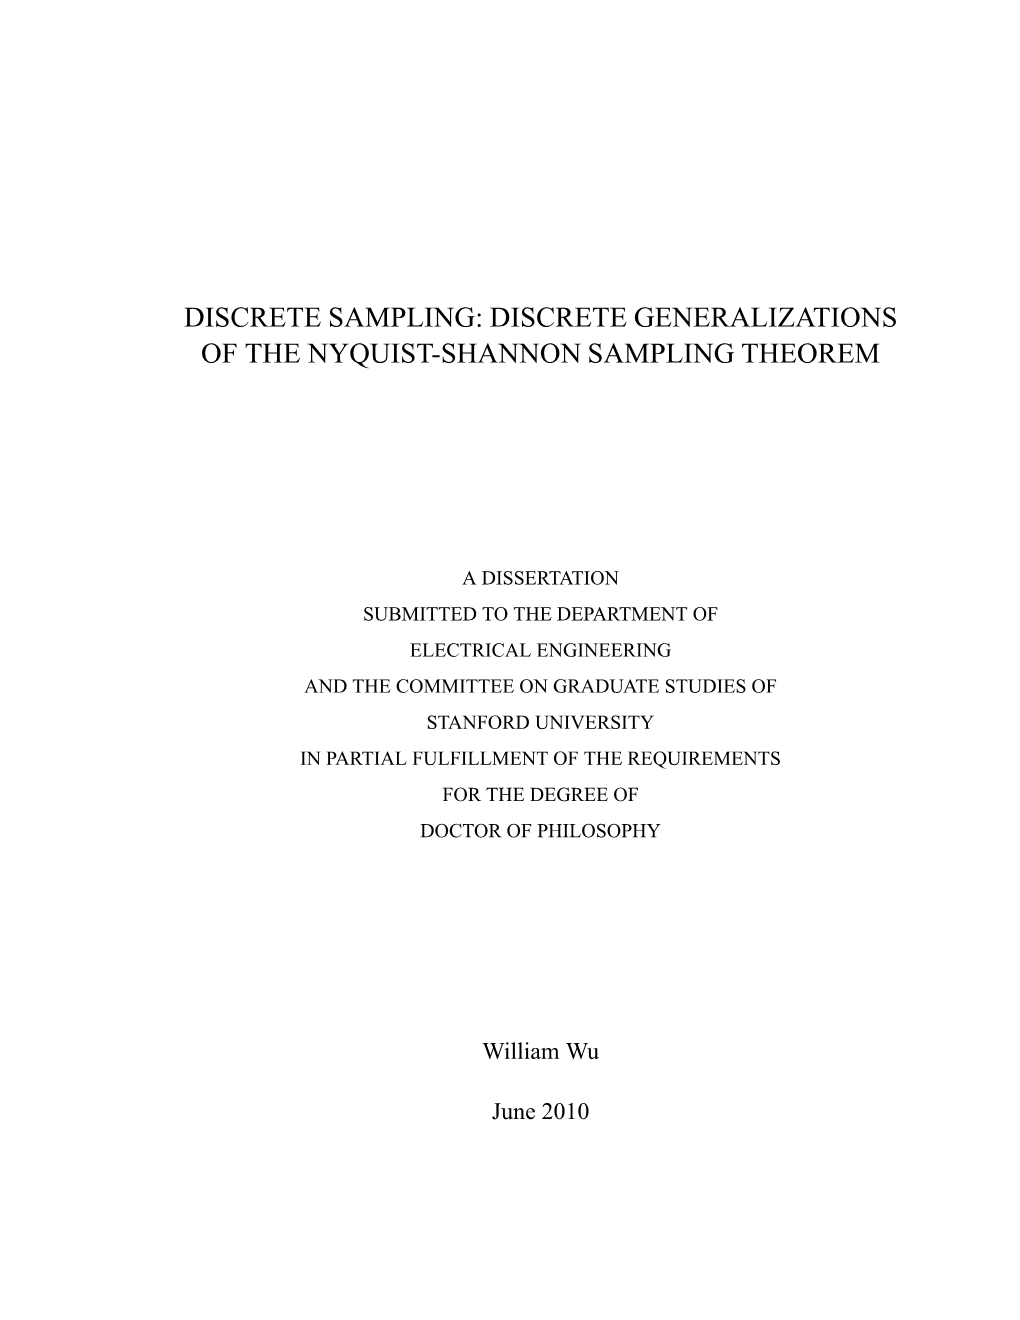 Discrete Generalizations of the Nyquist-Shannon Sampling Theorem